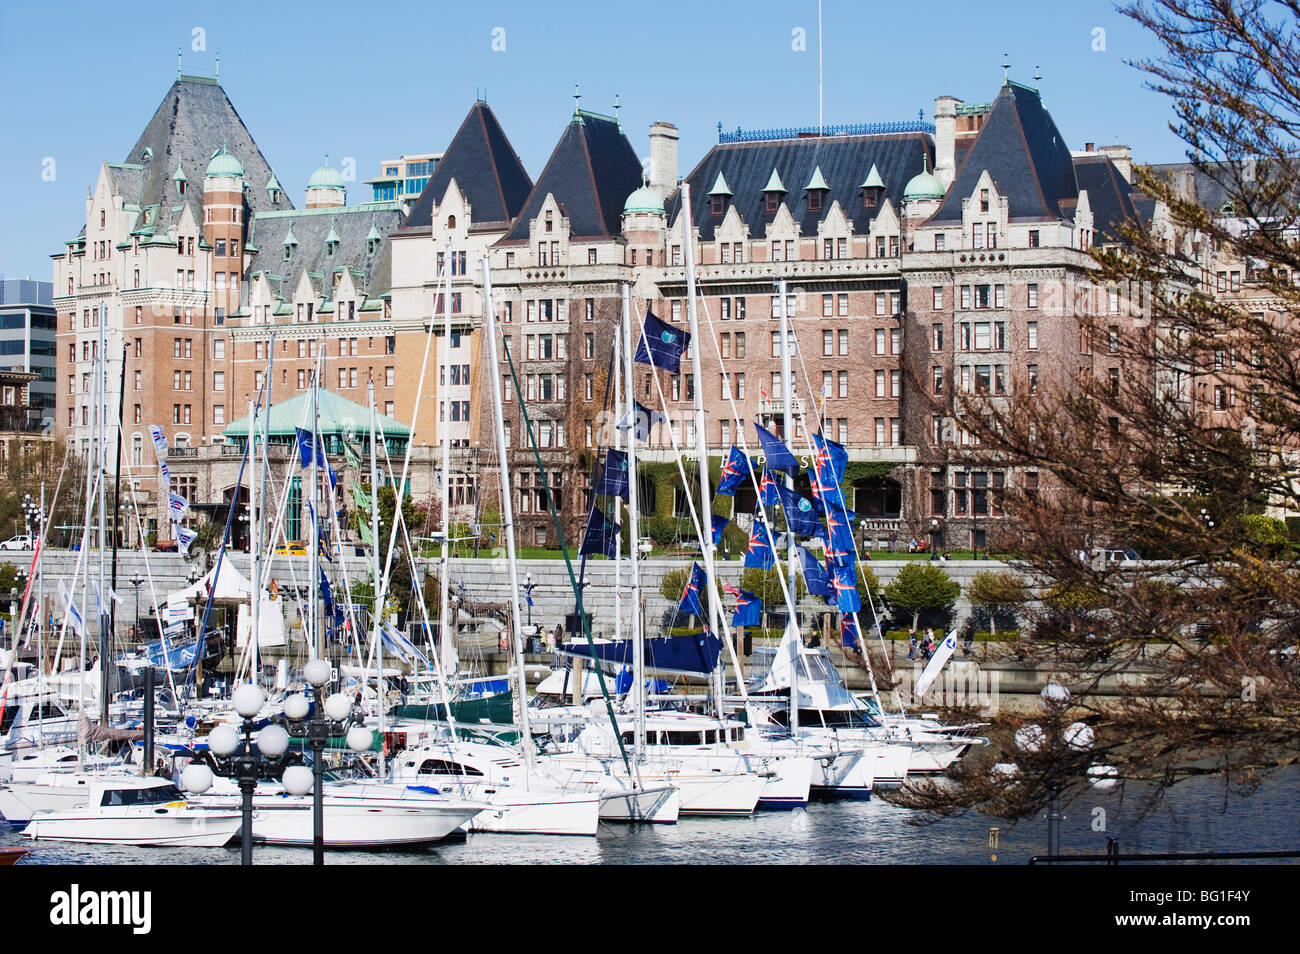 Boats in front of the Fairmont Empress Hotel, James Bay Inner Harbour, Victoria, Vancouver Island, British Columbia, Canada Stock Photo